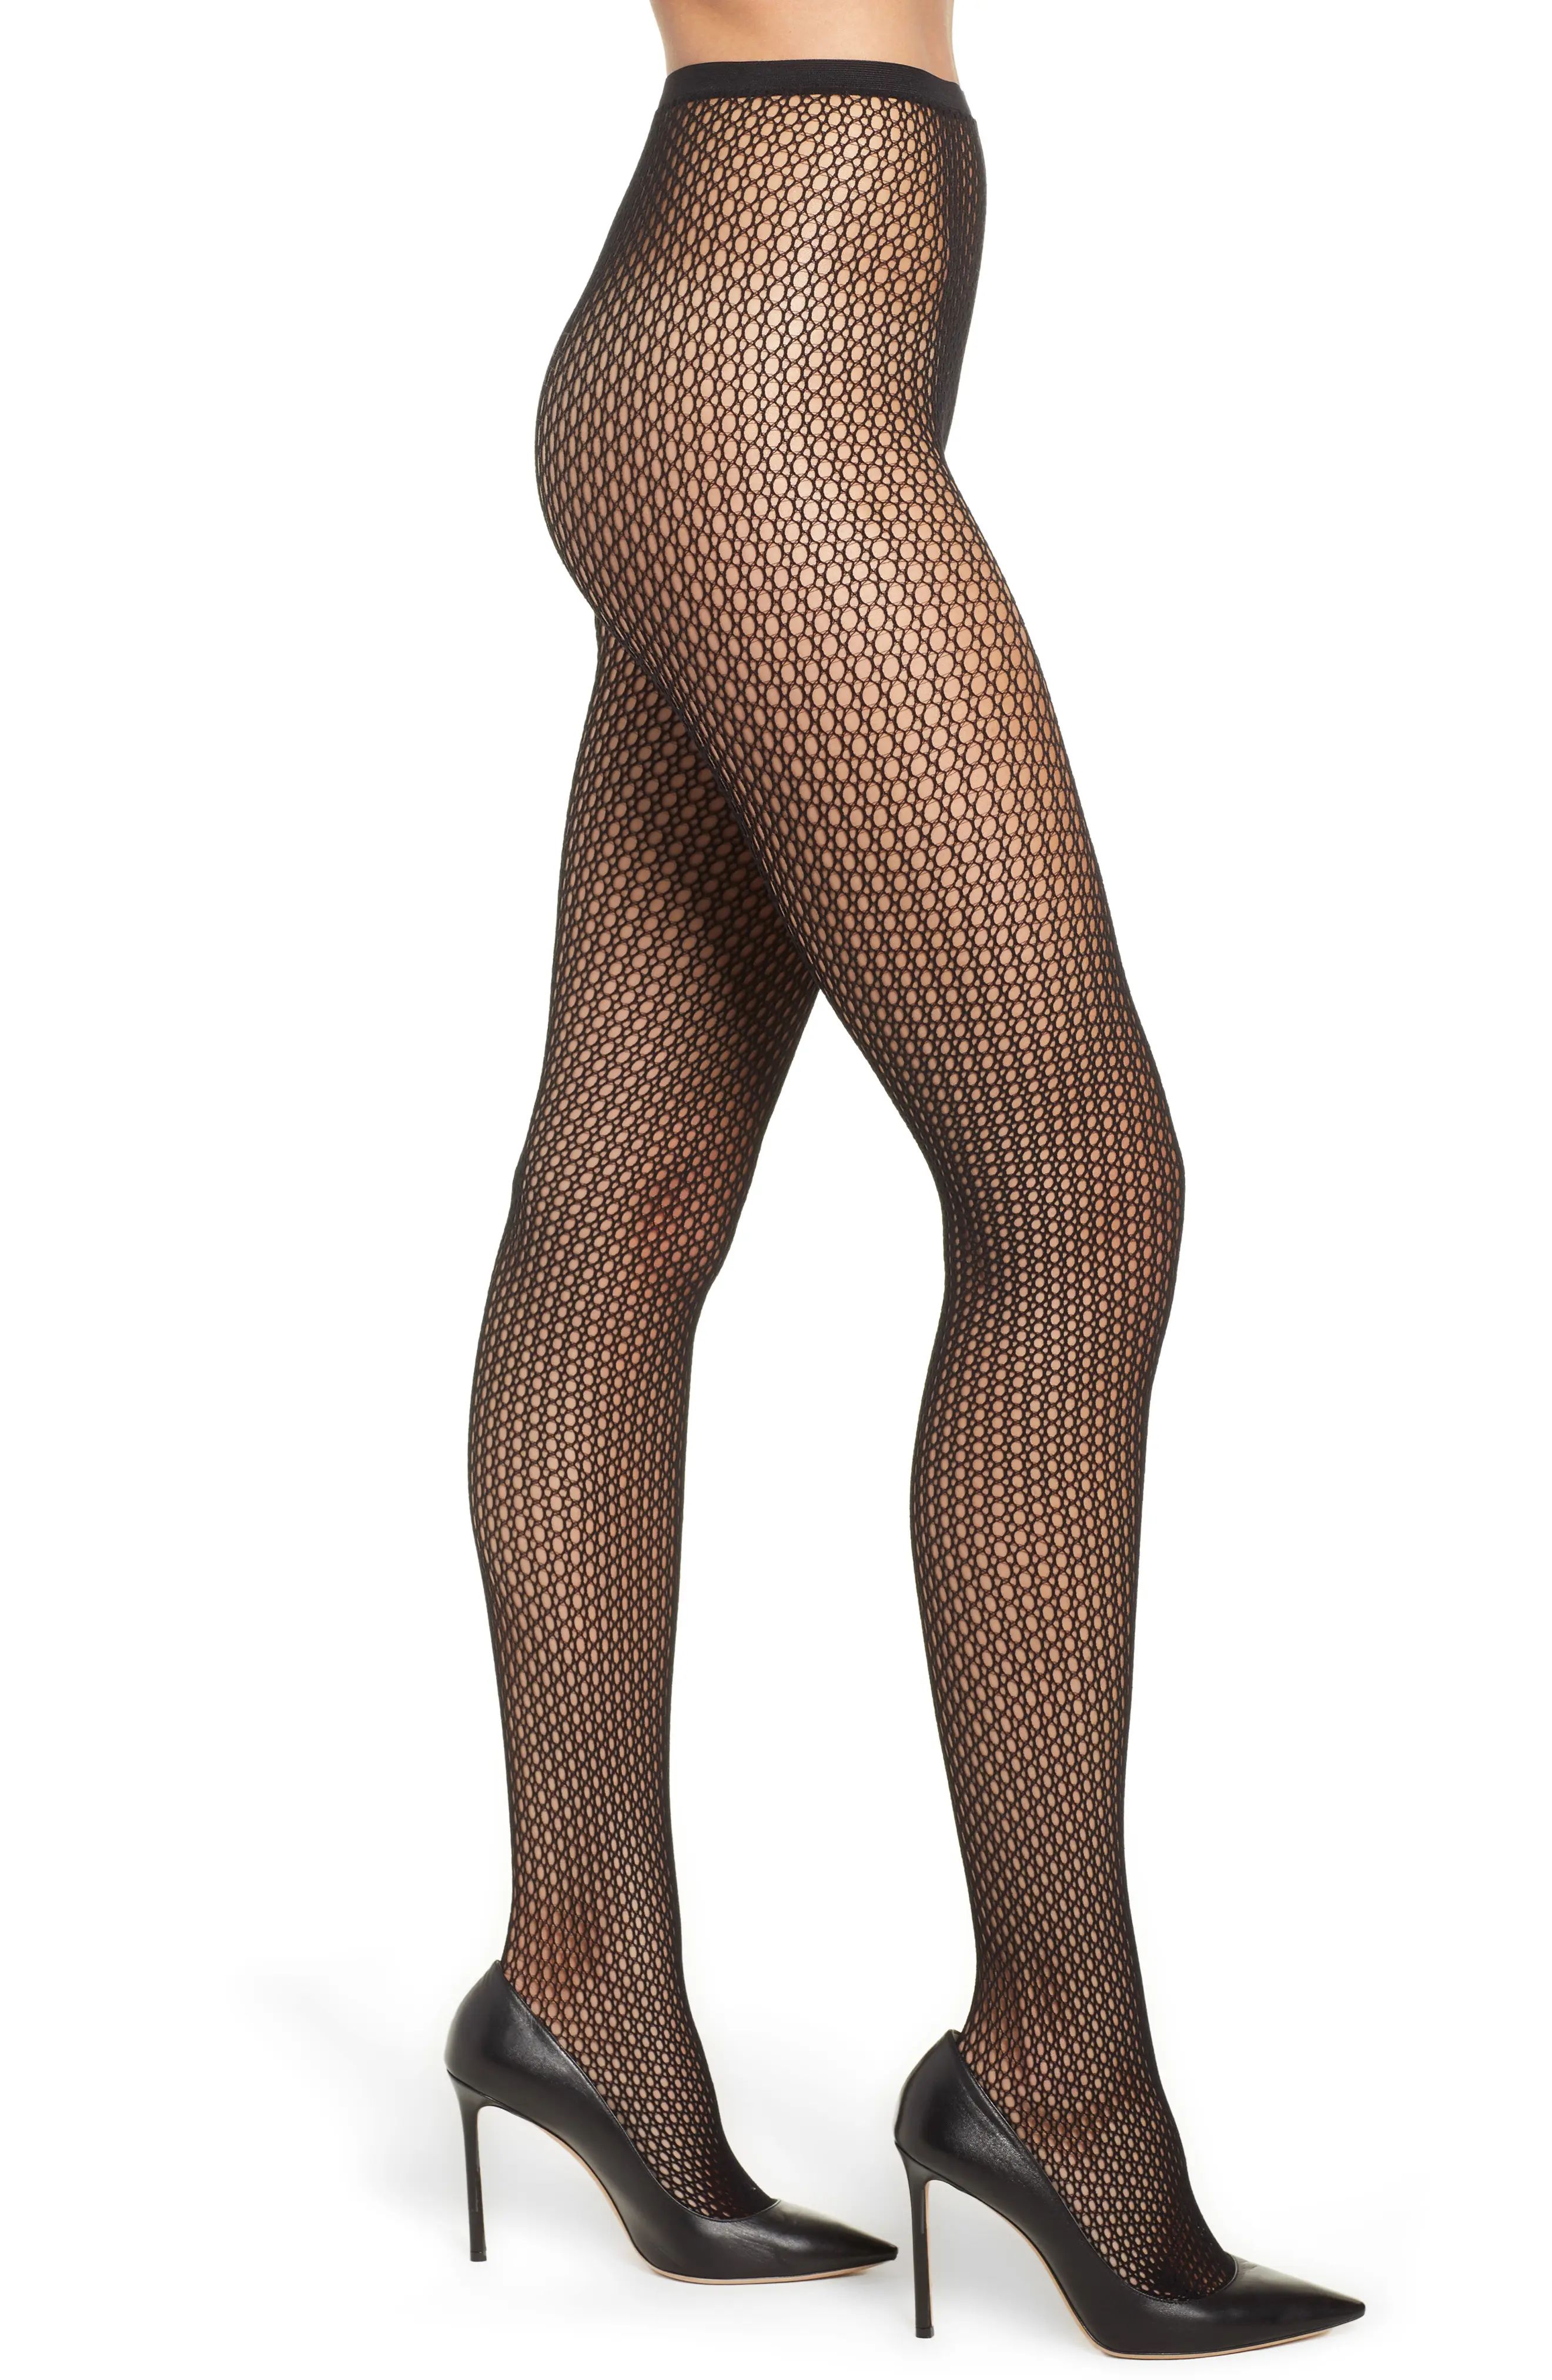 Zeza B by Hue Oval Net Tights | Nordstrom